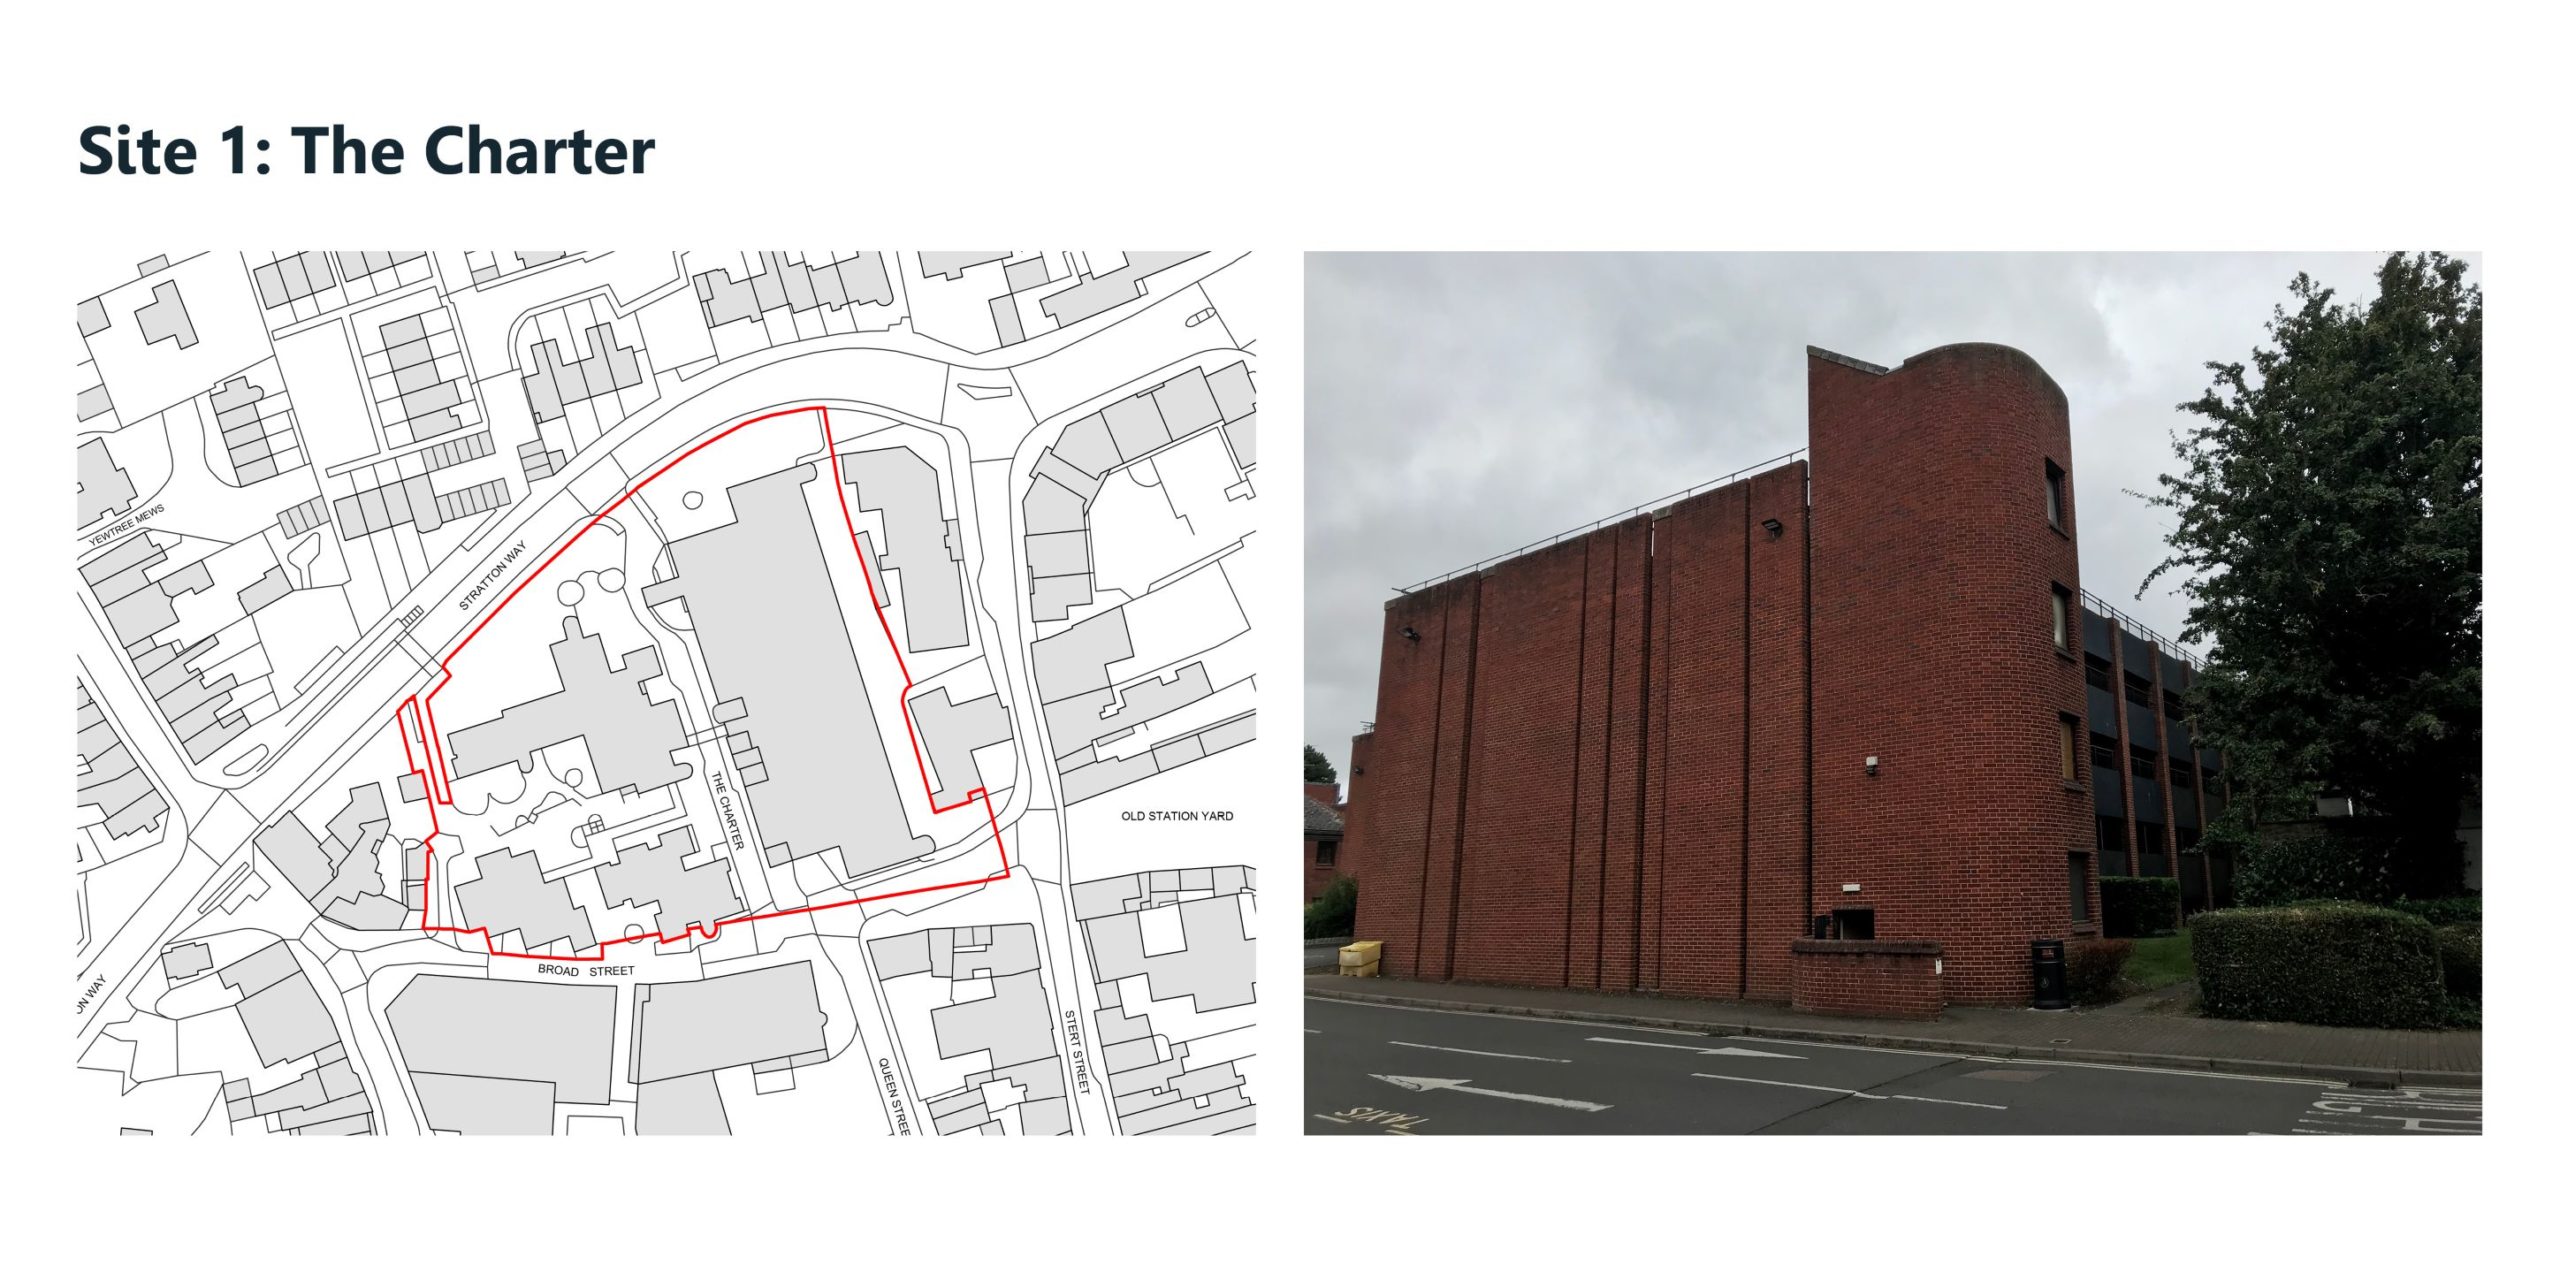 (left) Location plan of The Charter site showing the Site boundary. The site is bounded by Stratton Way to the North and Broad Street to the south. (right) photograph of the 4 storey Charter carpark building.